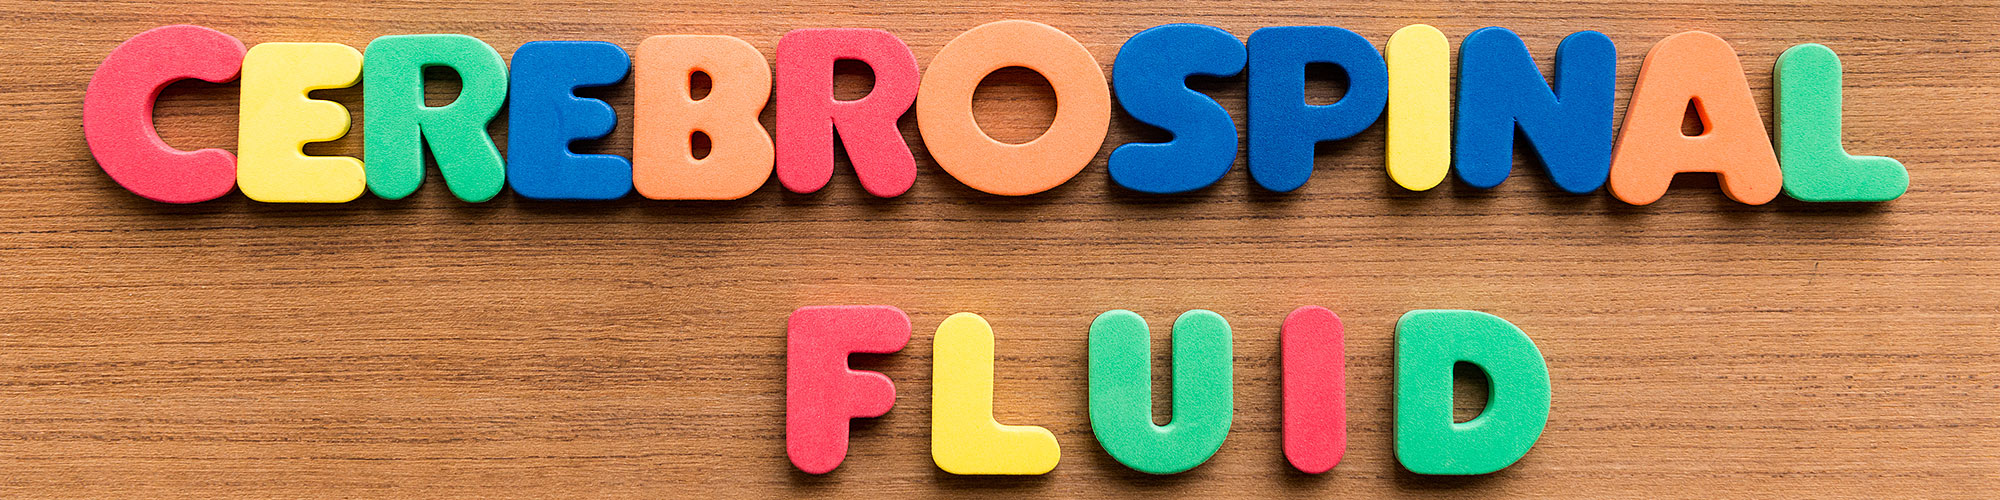 cerbrospinal fluid spelled out in children's letters